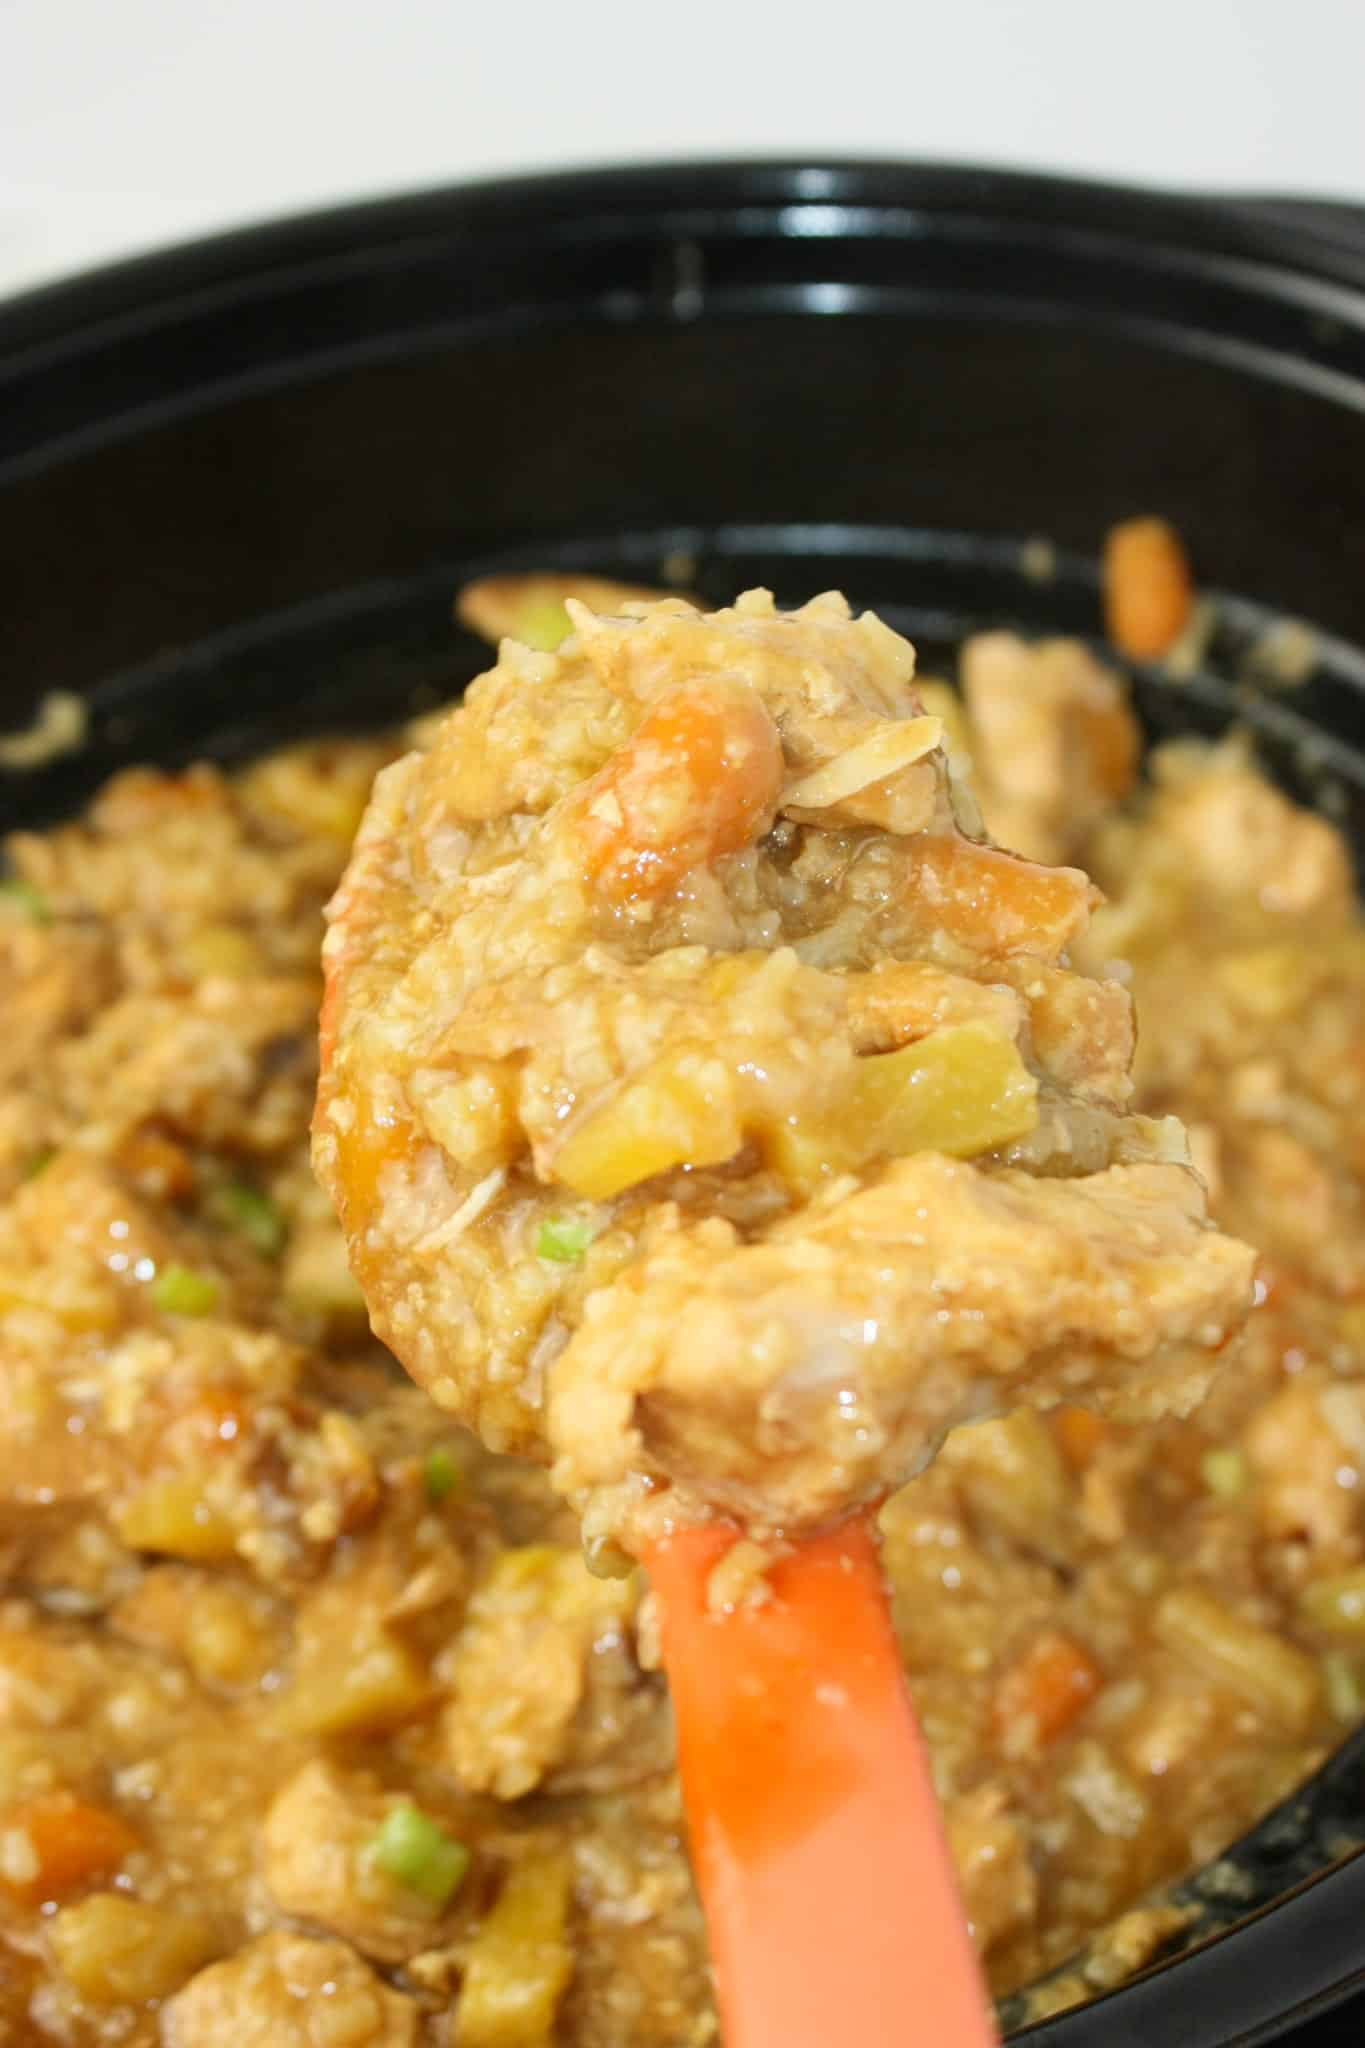 Crock Pot Teriyaki Chicken and Rice is an easy slow cooker recipe for any time of the year.  This one pot dinner is a complete meal for any day of the week.